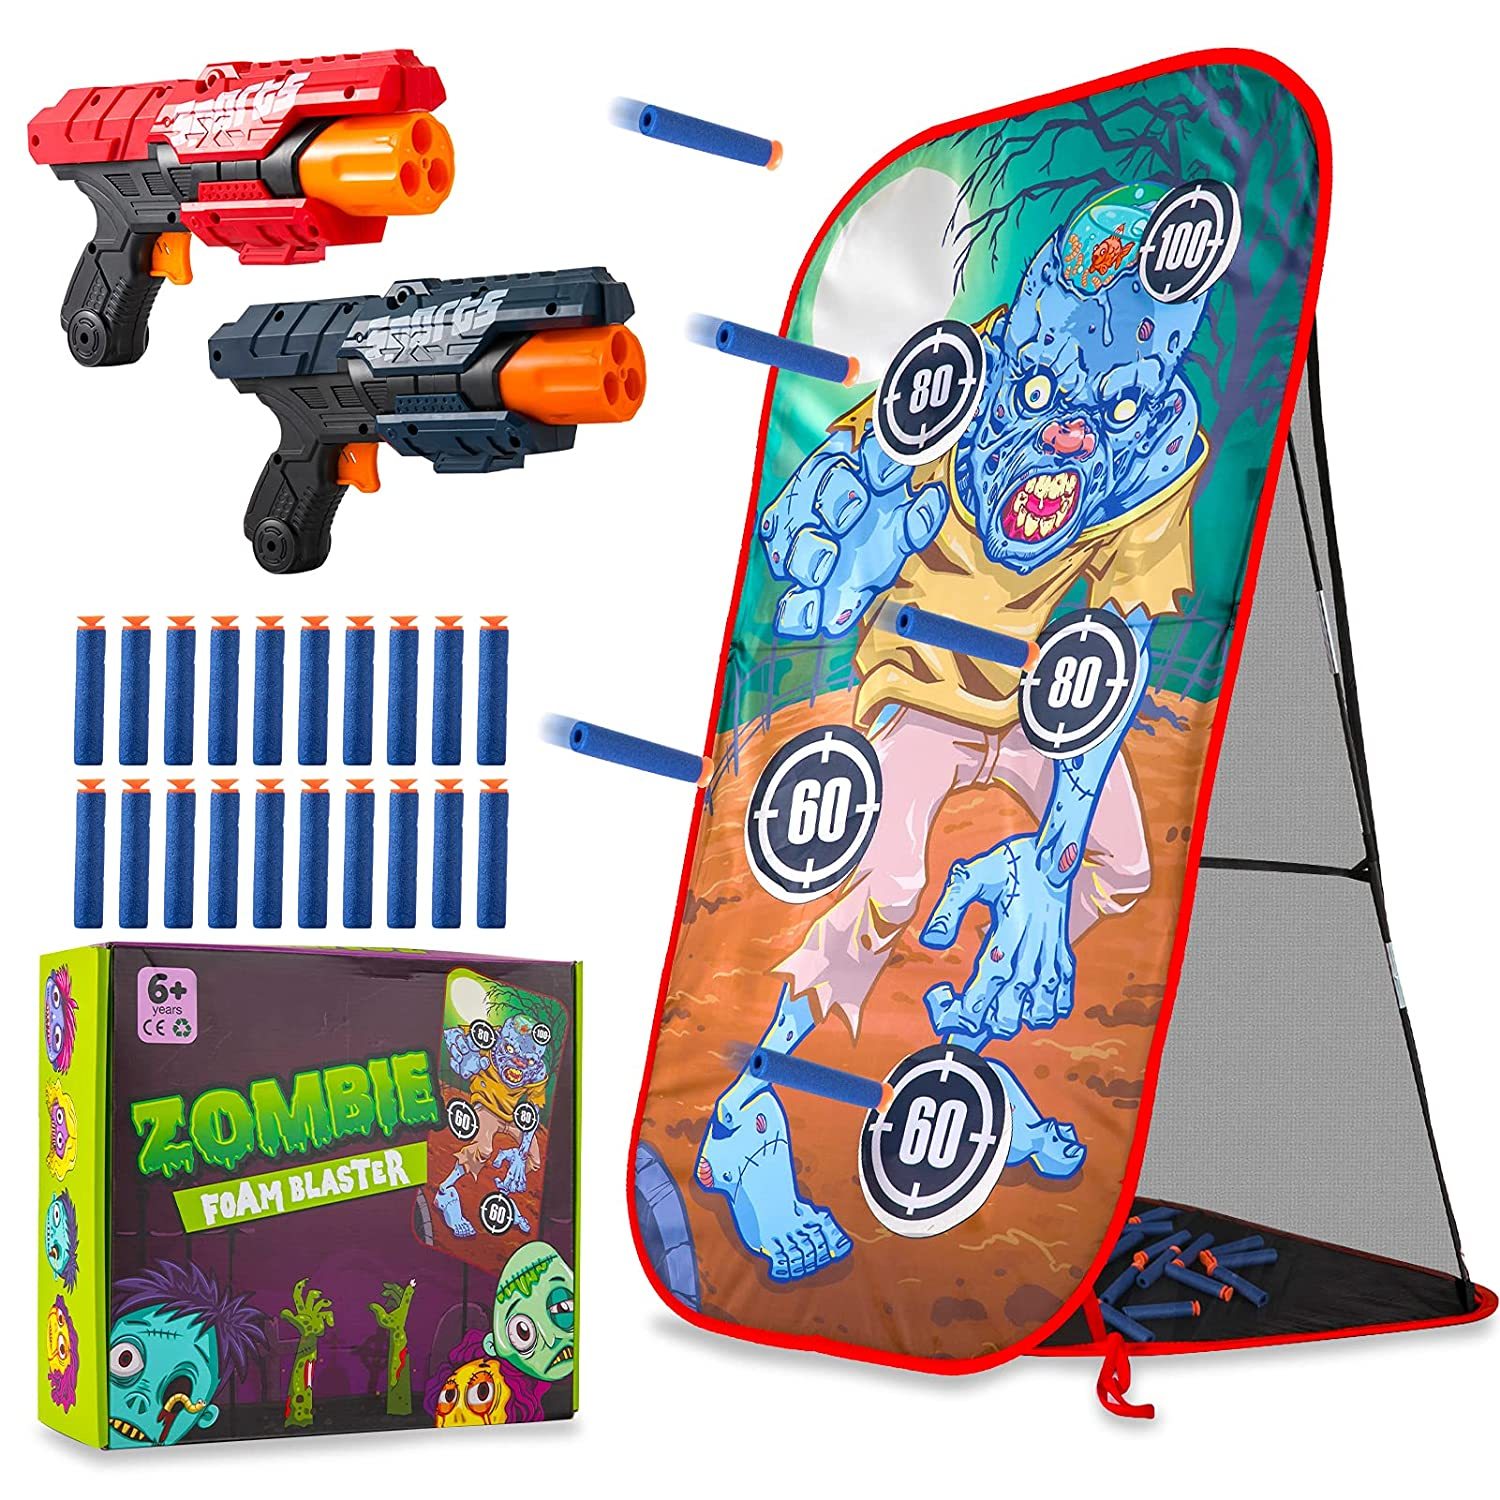 Shooting Game Toy With 2 Foam Blasters & Guns, Stable Shooting Targets